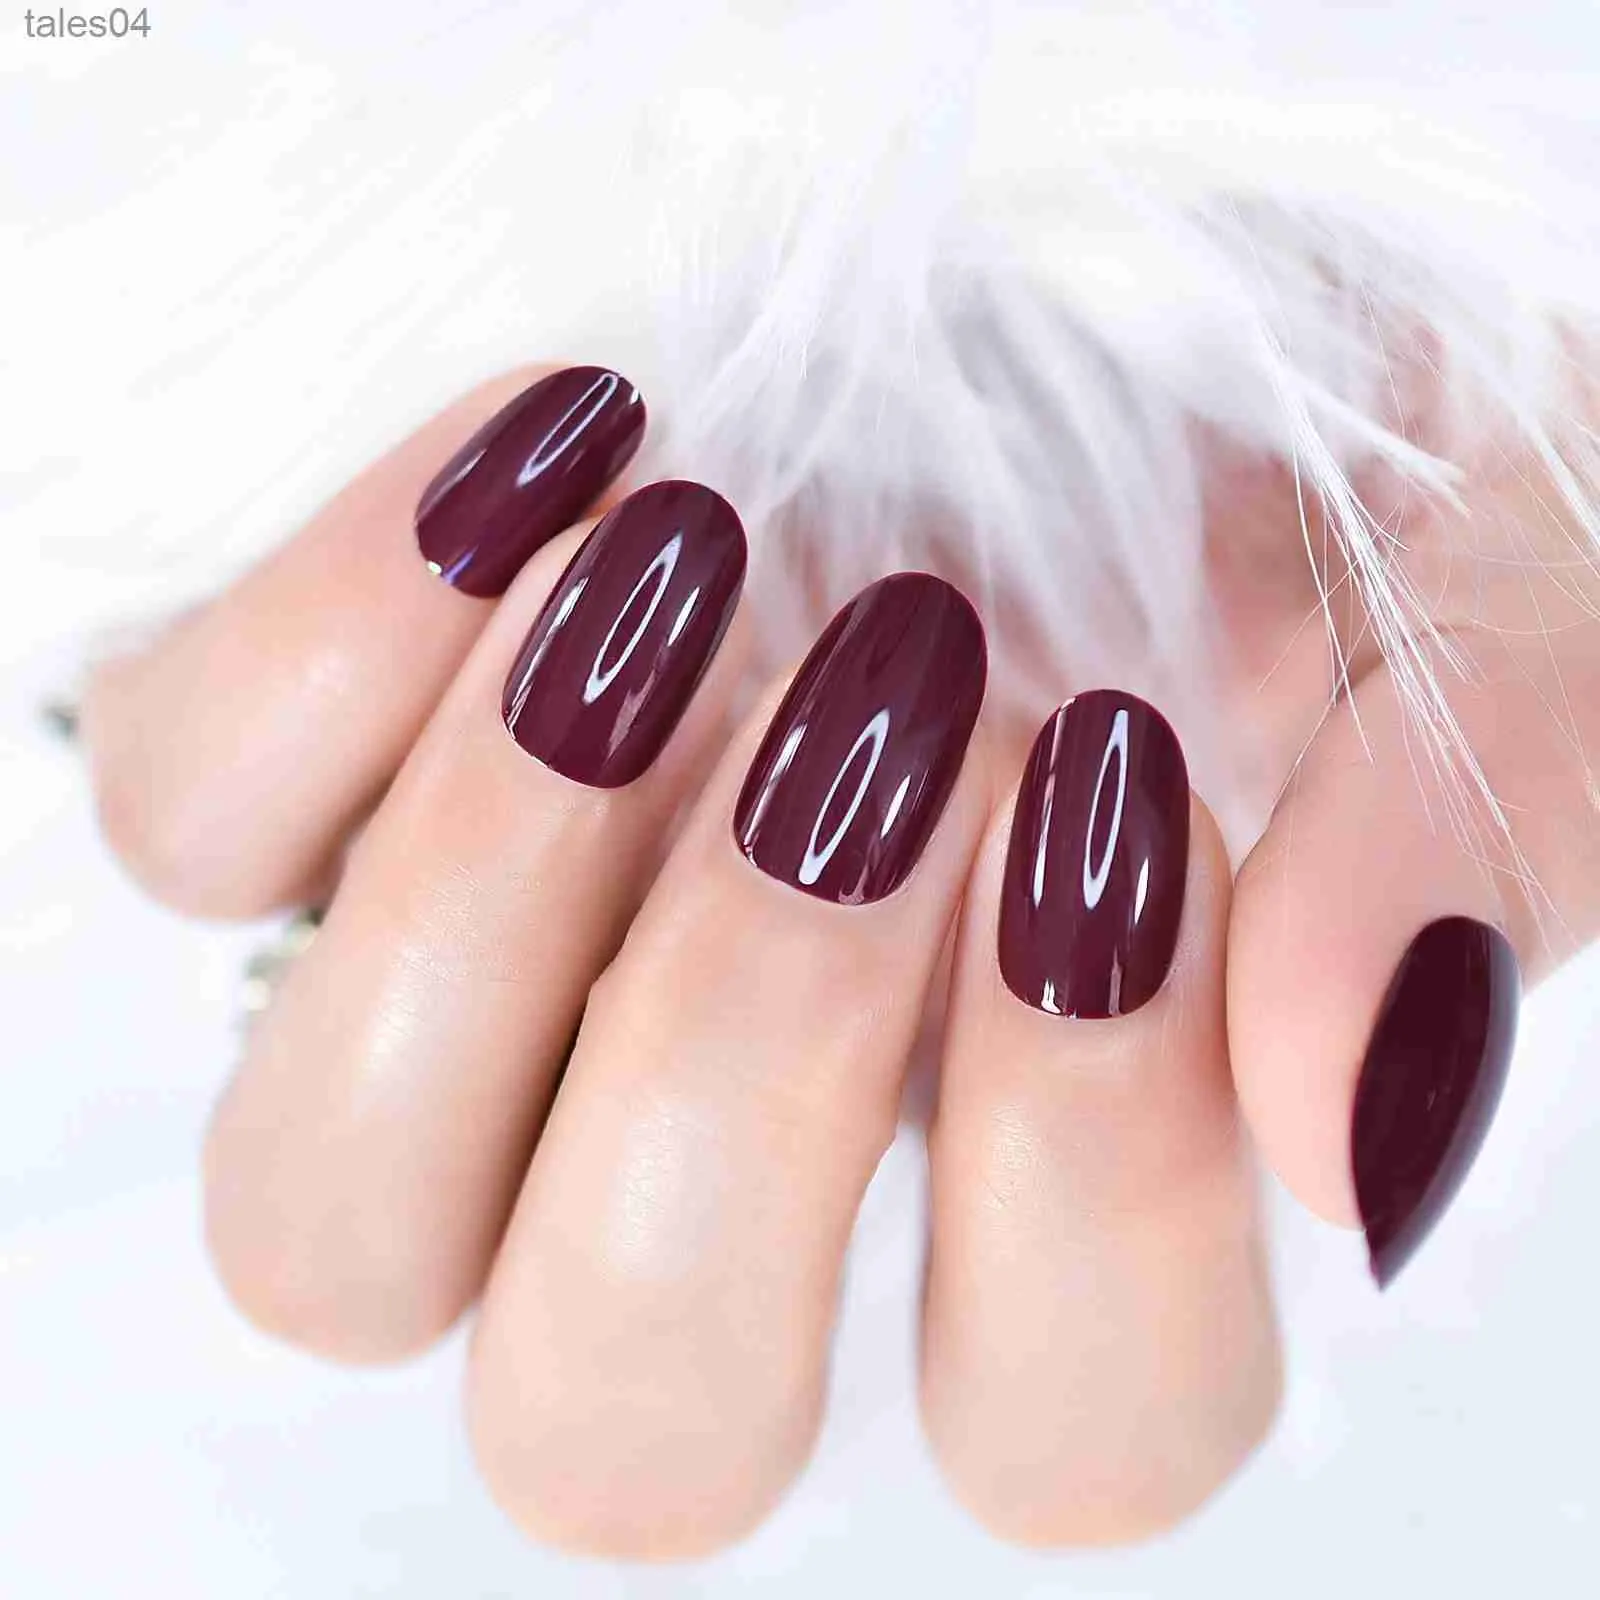 Lick - Press on Nails 28 Pcs Reusable Artificial/False Nails Extension Nail  Art With Application Kit Dark Purple Ombre With Glitter Ballerina - Price  in India, Buy Lick - Press on Nails